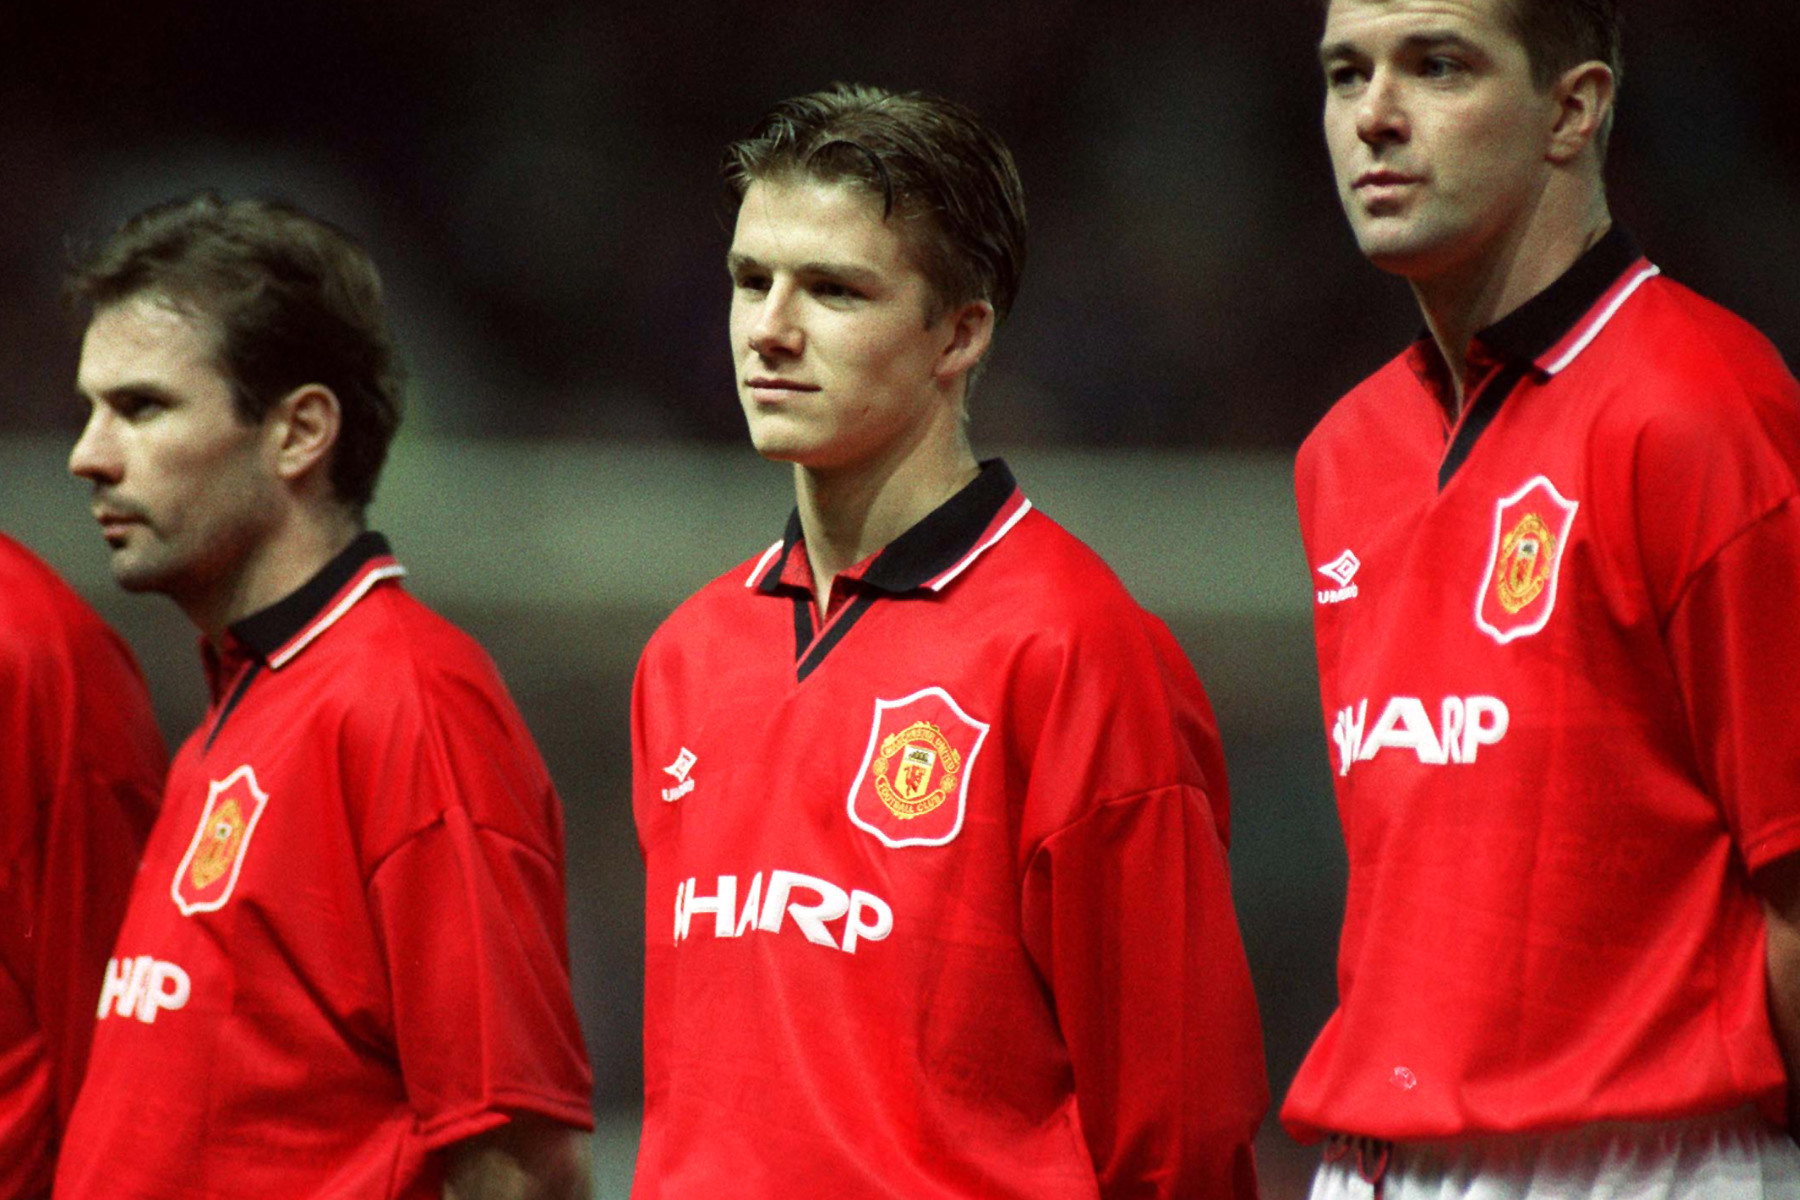 An exhaustive list of David Beckham's hairstyles from over the years.